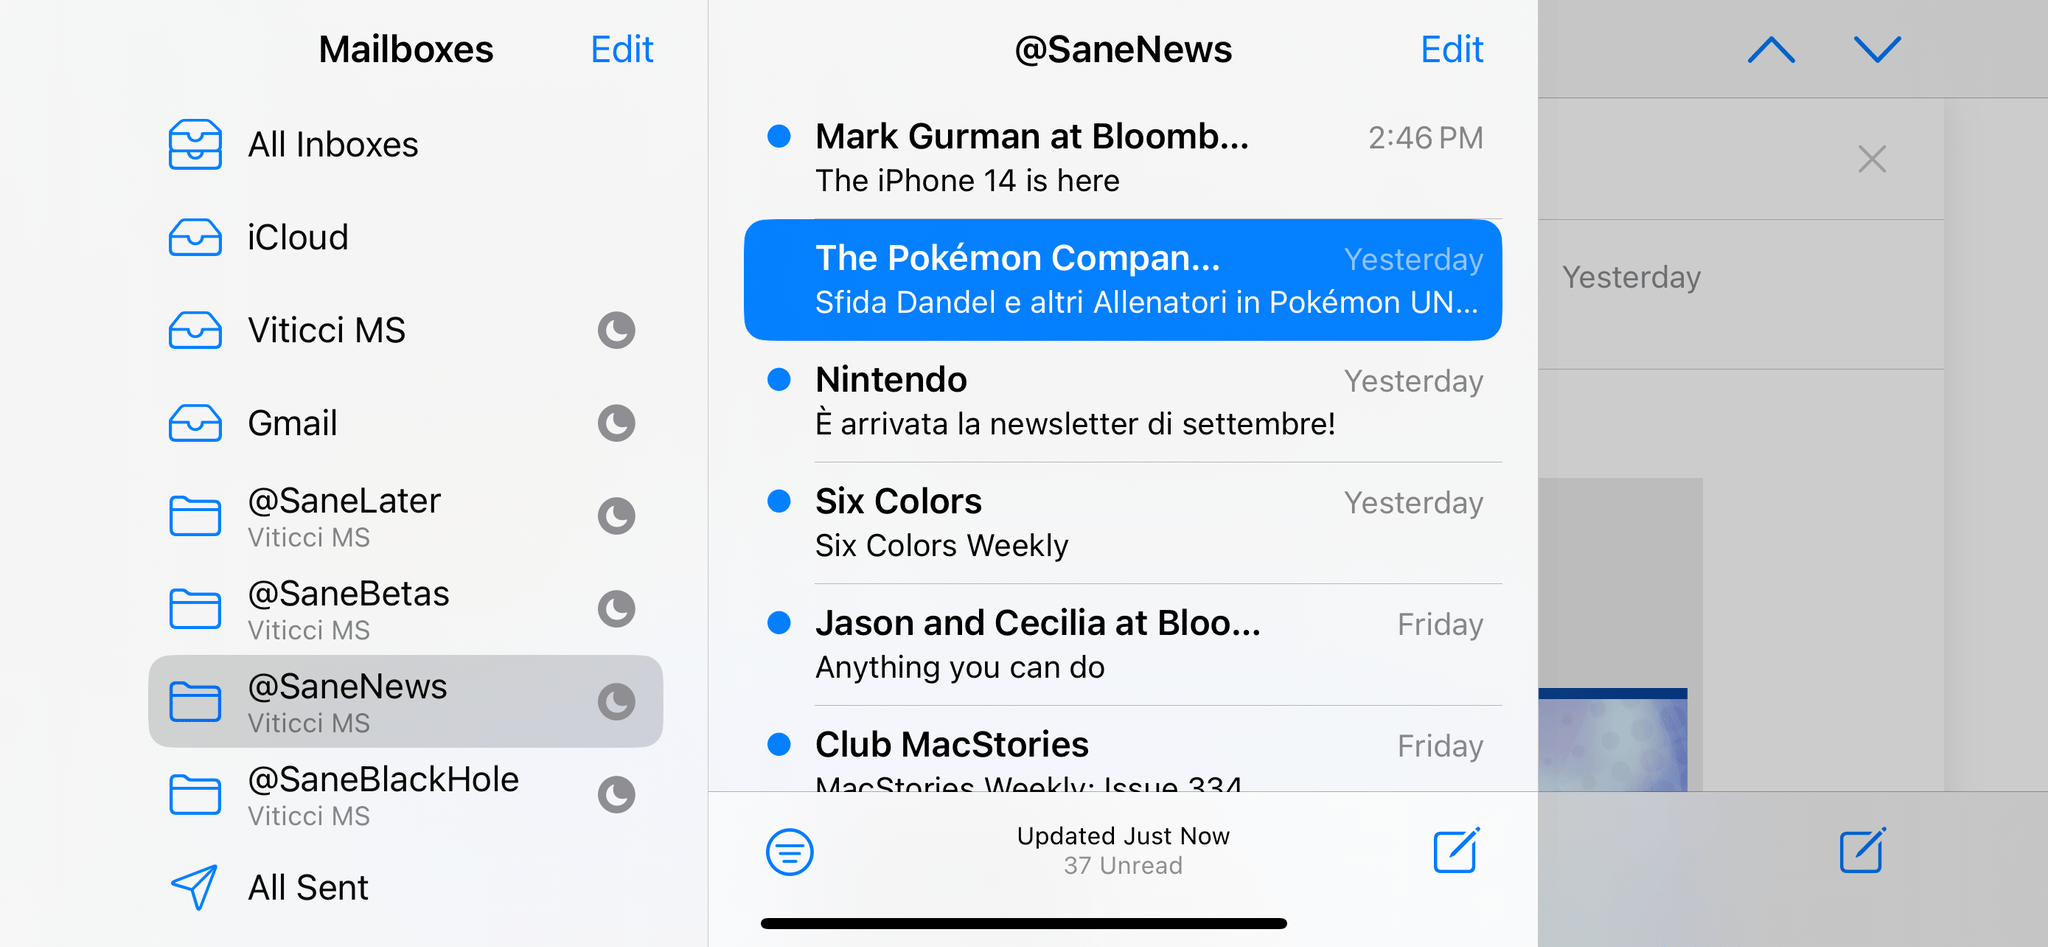 Focus filters in Mail.